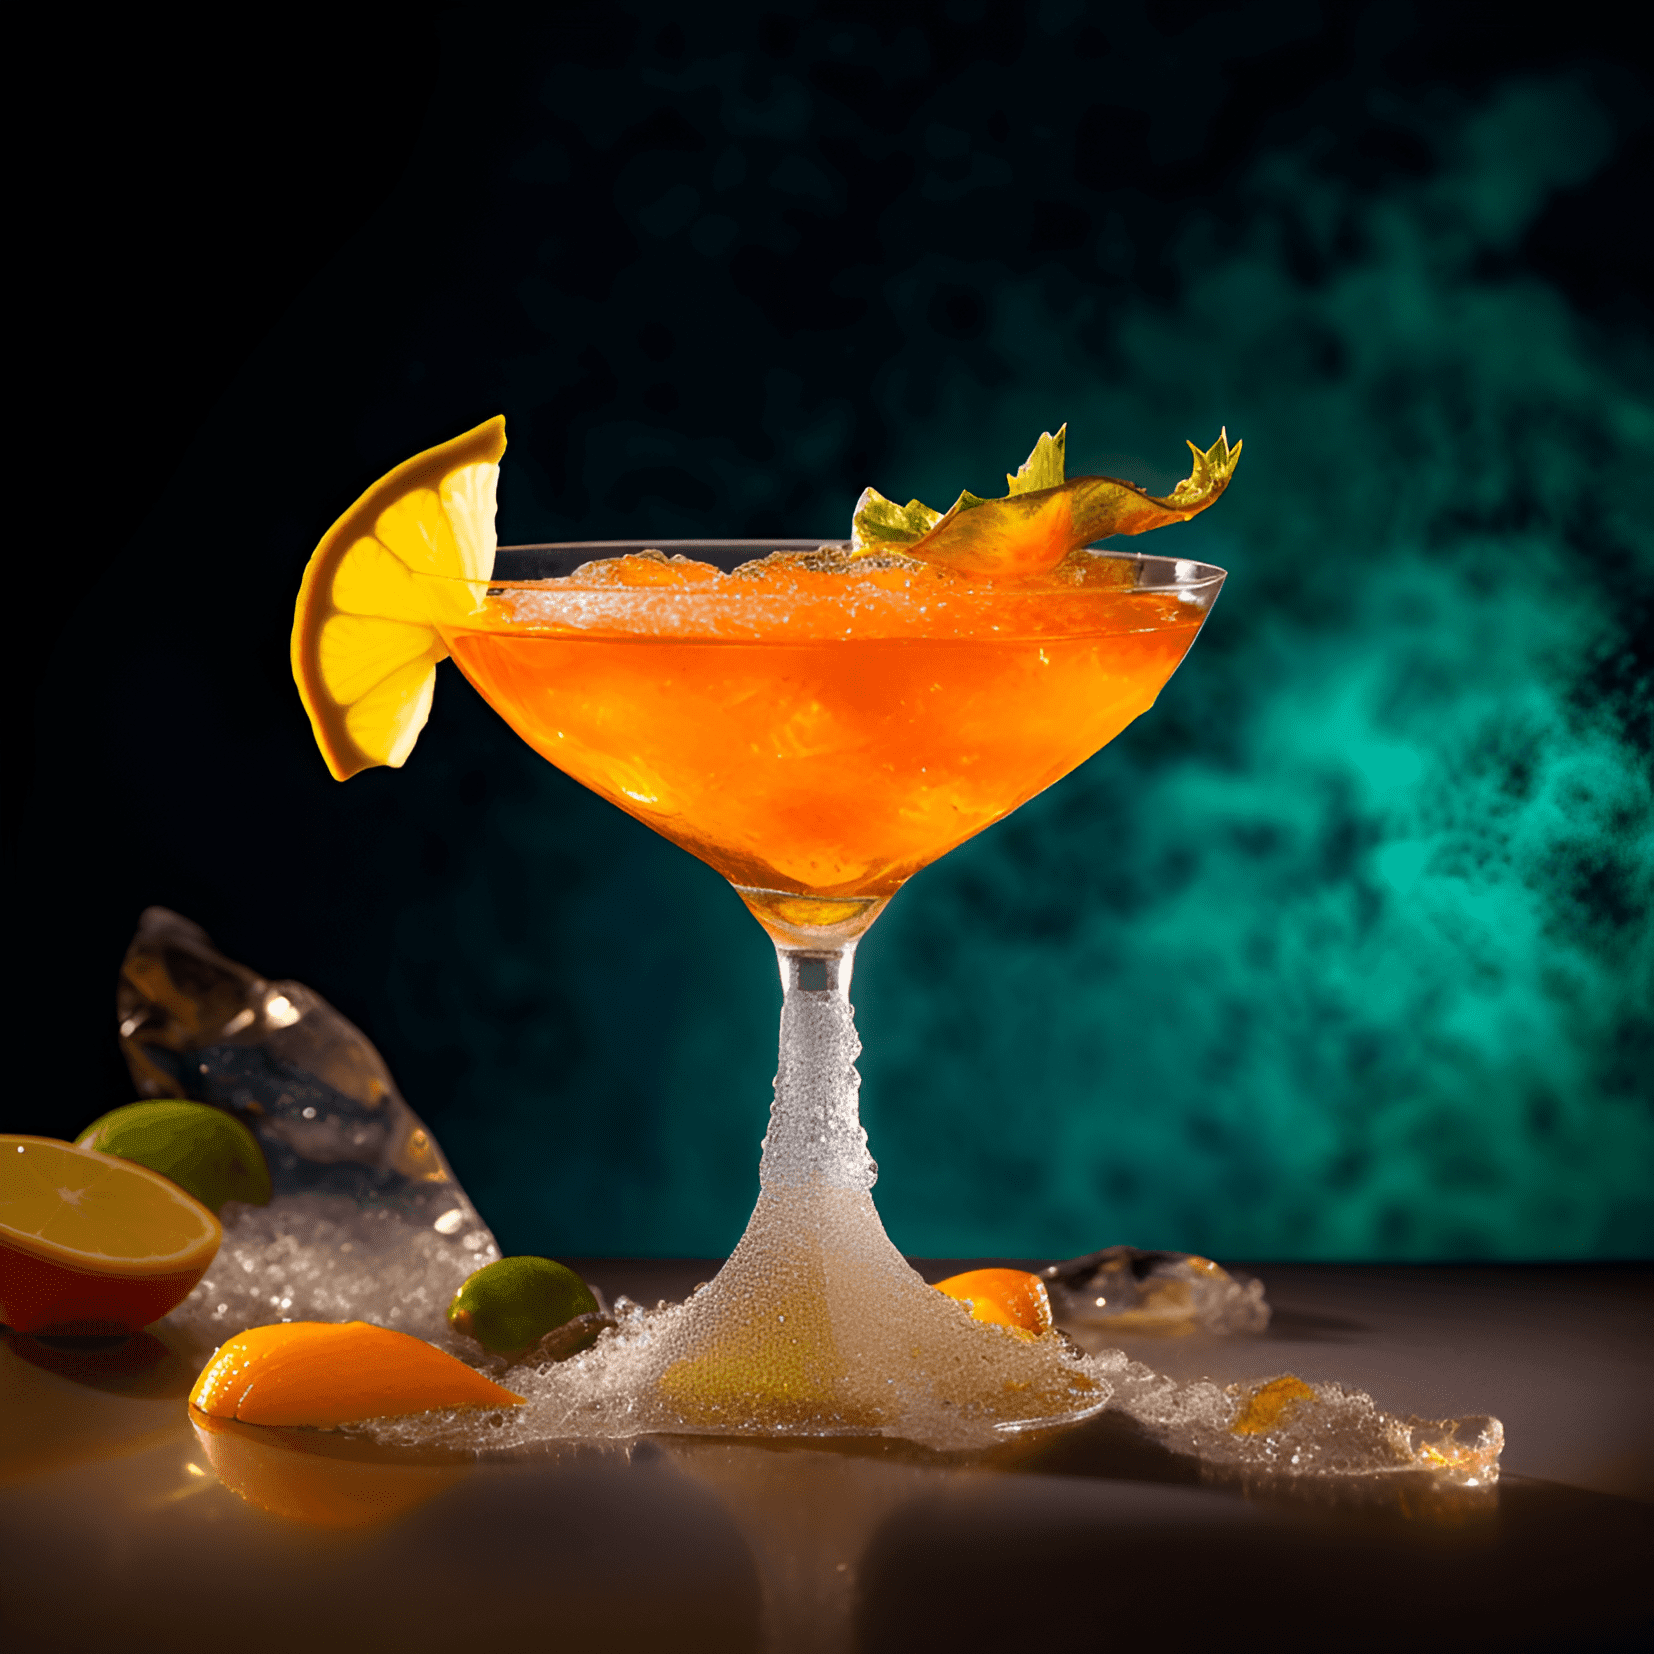 Swordfish Cocktail Recipe - The Swordfish cocktail is a harmonious blend of sweet, sour, and slightly bitter flavors. The drink is light and refreshing, with a subtle hint of fruitiness and a smooth, velvety finish.